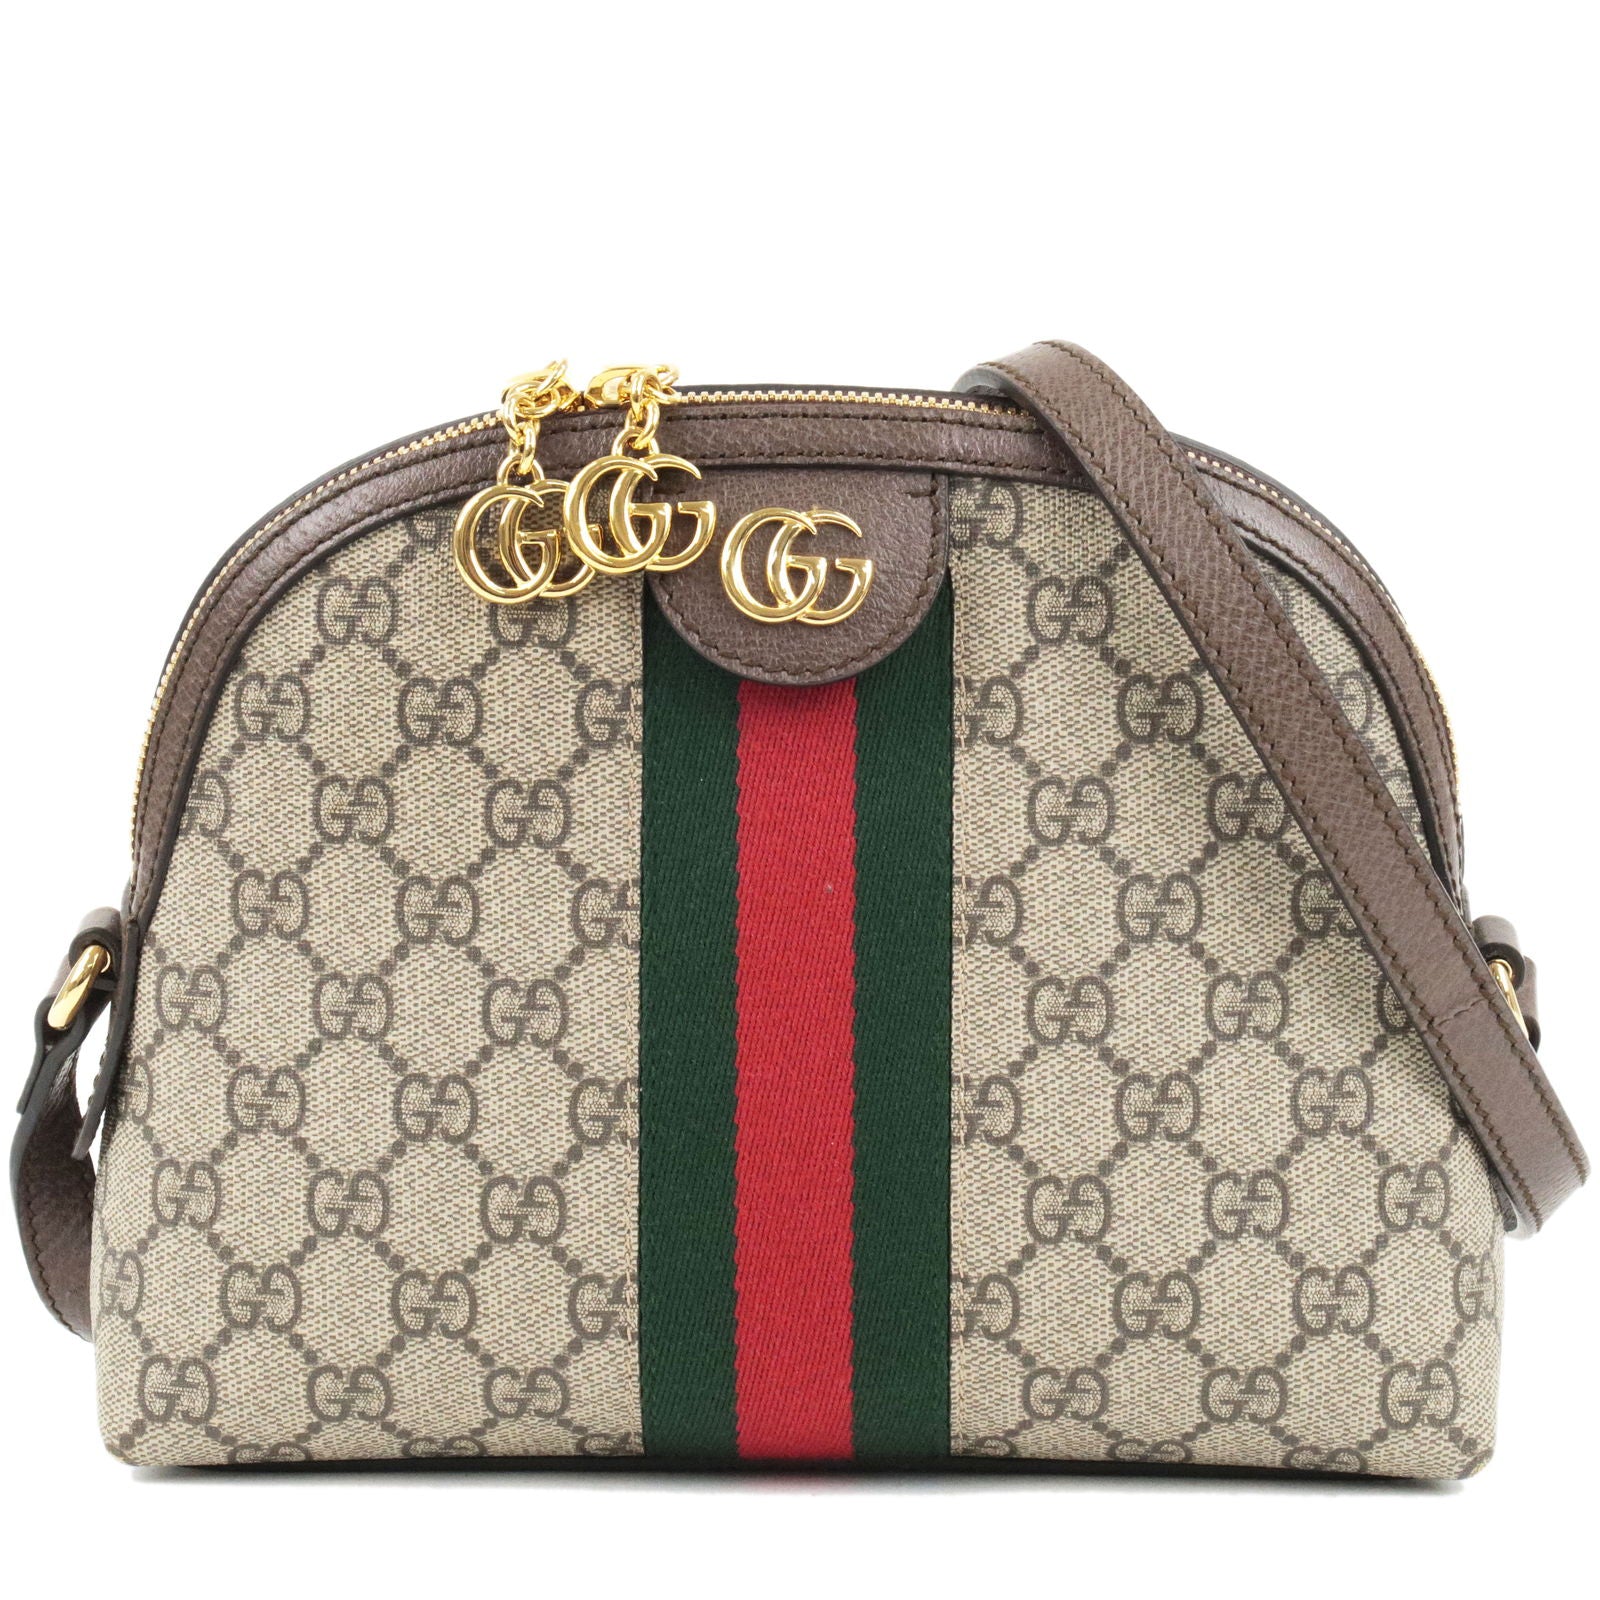 GUCCI-Ophidia-Sherry-GG-Supreme-Leather-Shoulder-Bag-499621